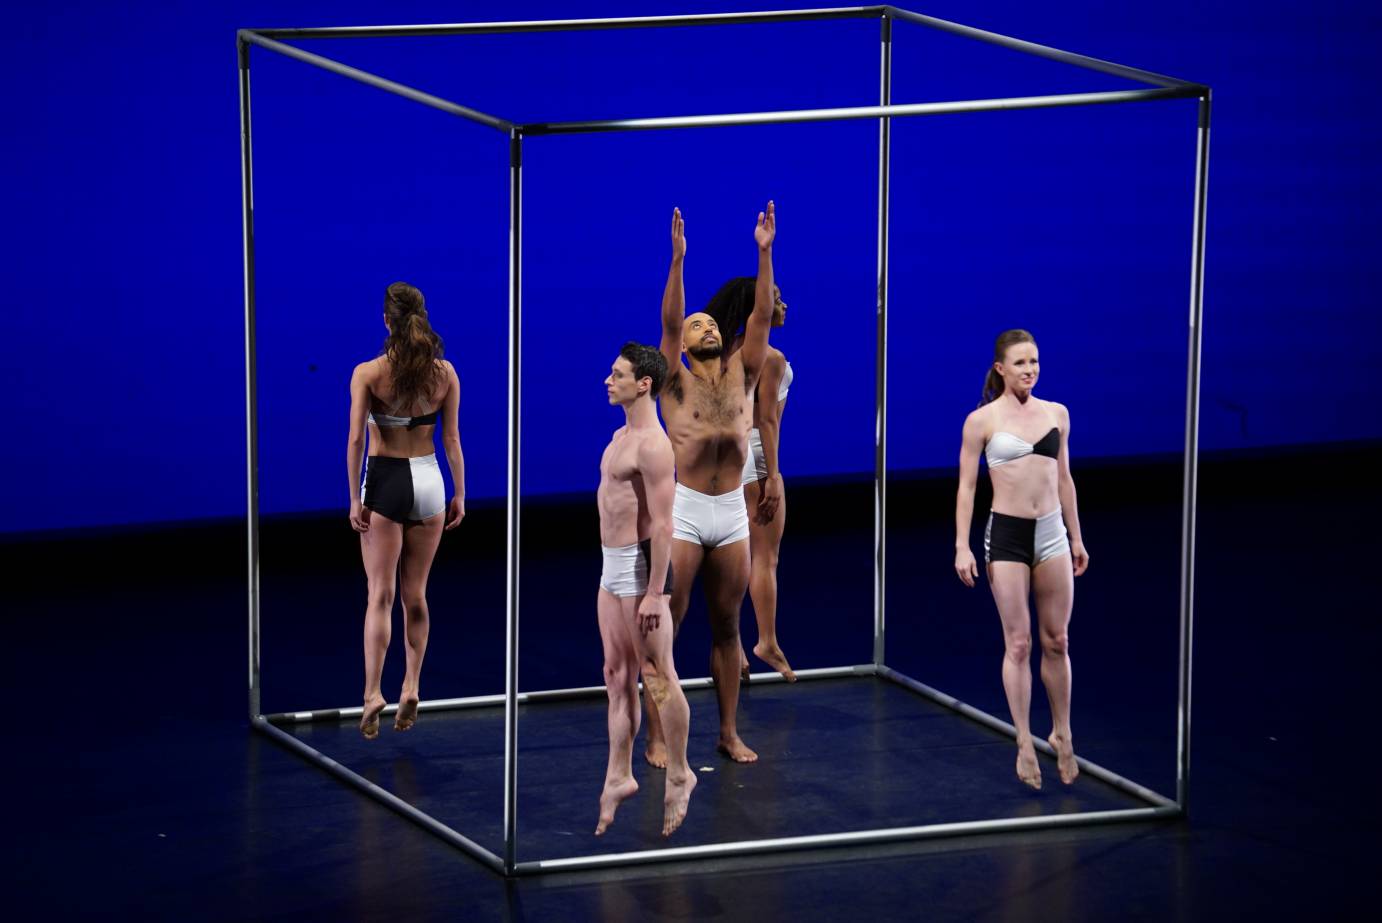 dancers in black and white shorts and black and white bikinis jump upright in a minimalist version of a cube